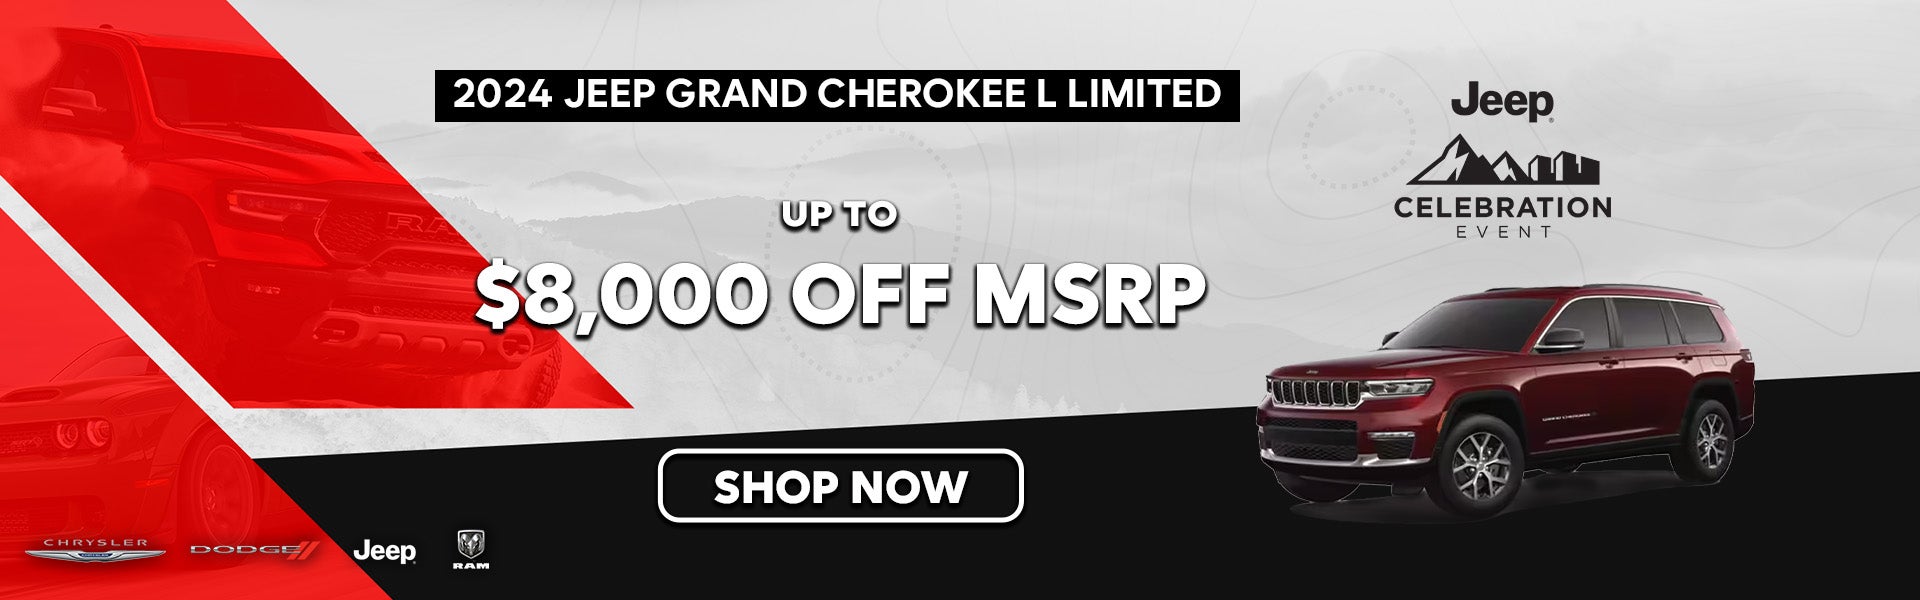 2024 Jeep Grand Cherokee L Limited Special Offer